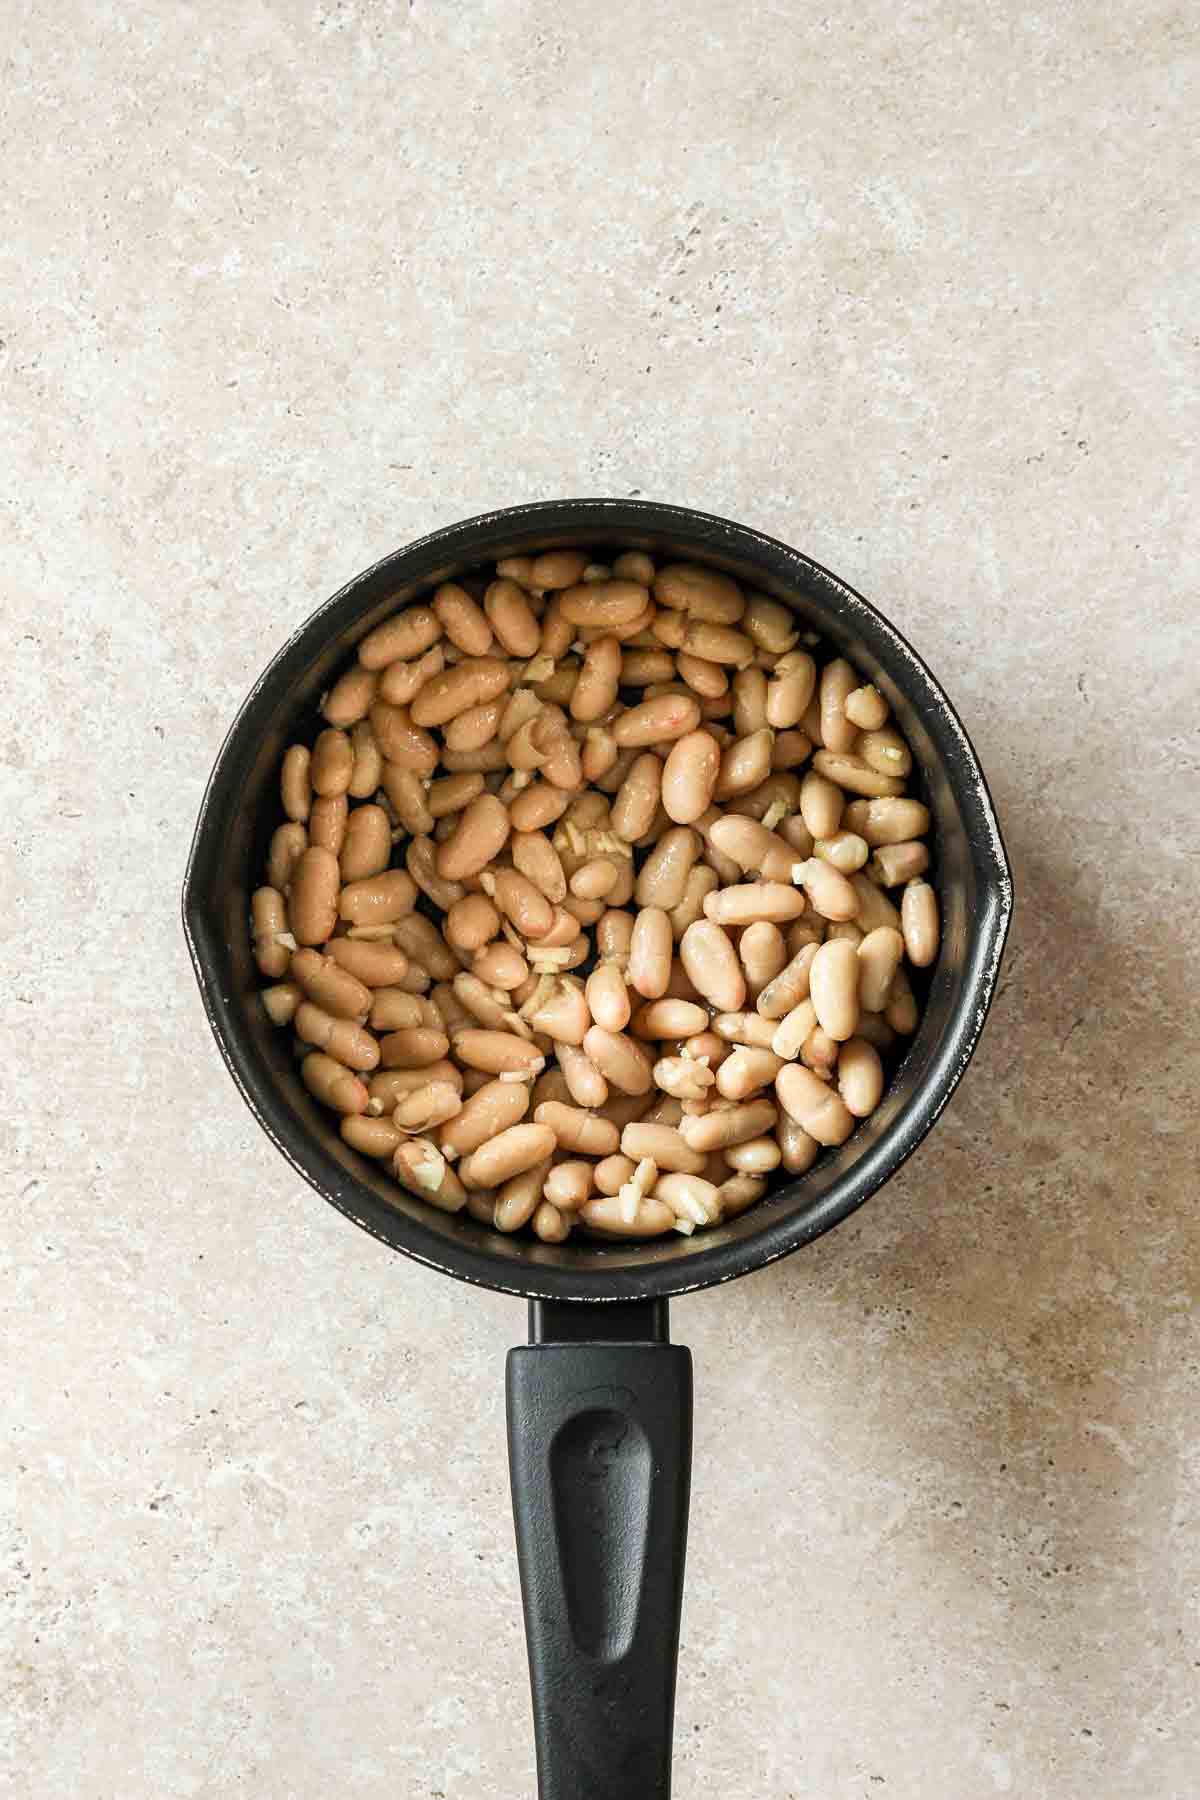 olive oil, white beans and minced garlic in non-stick saucepan.